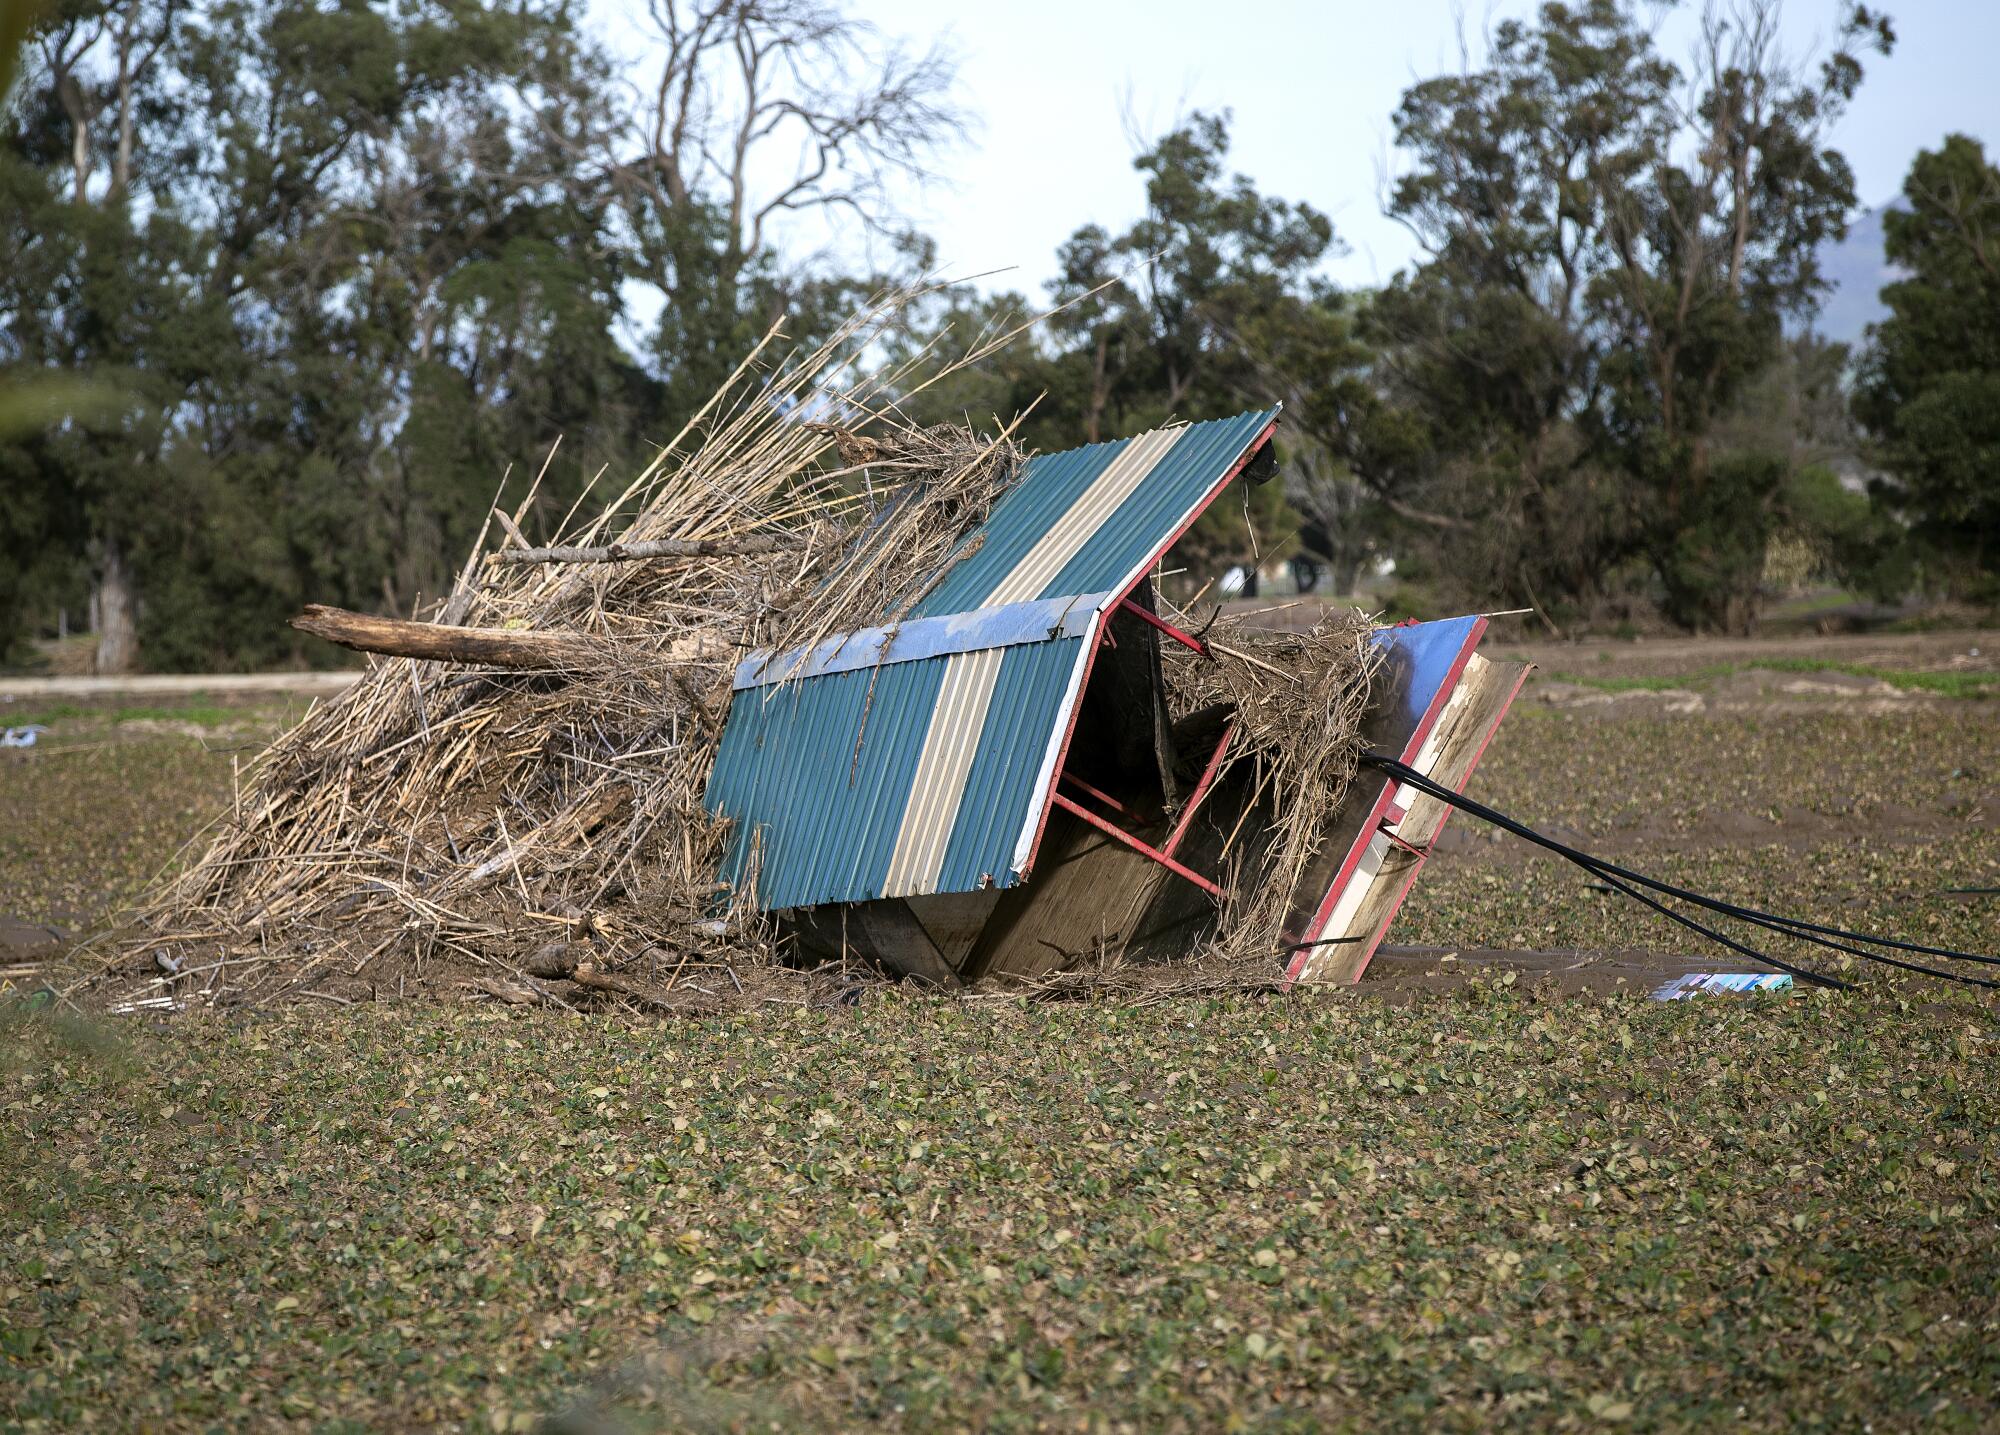 Damaged farm equipment lays covered with debris.